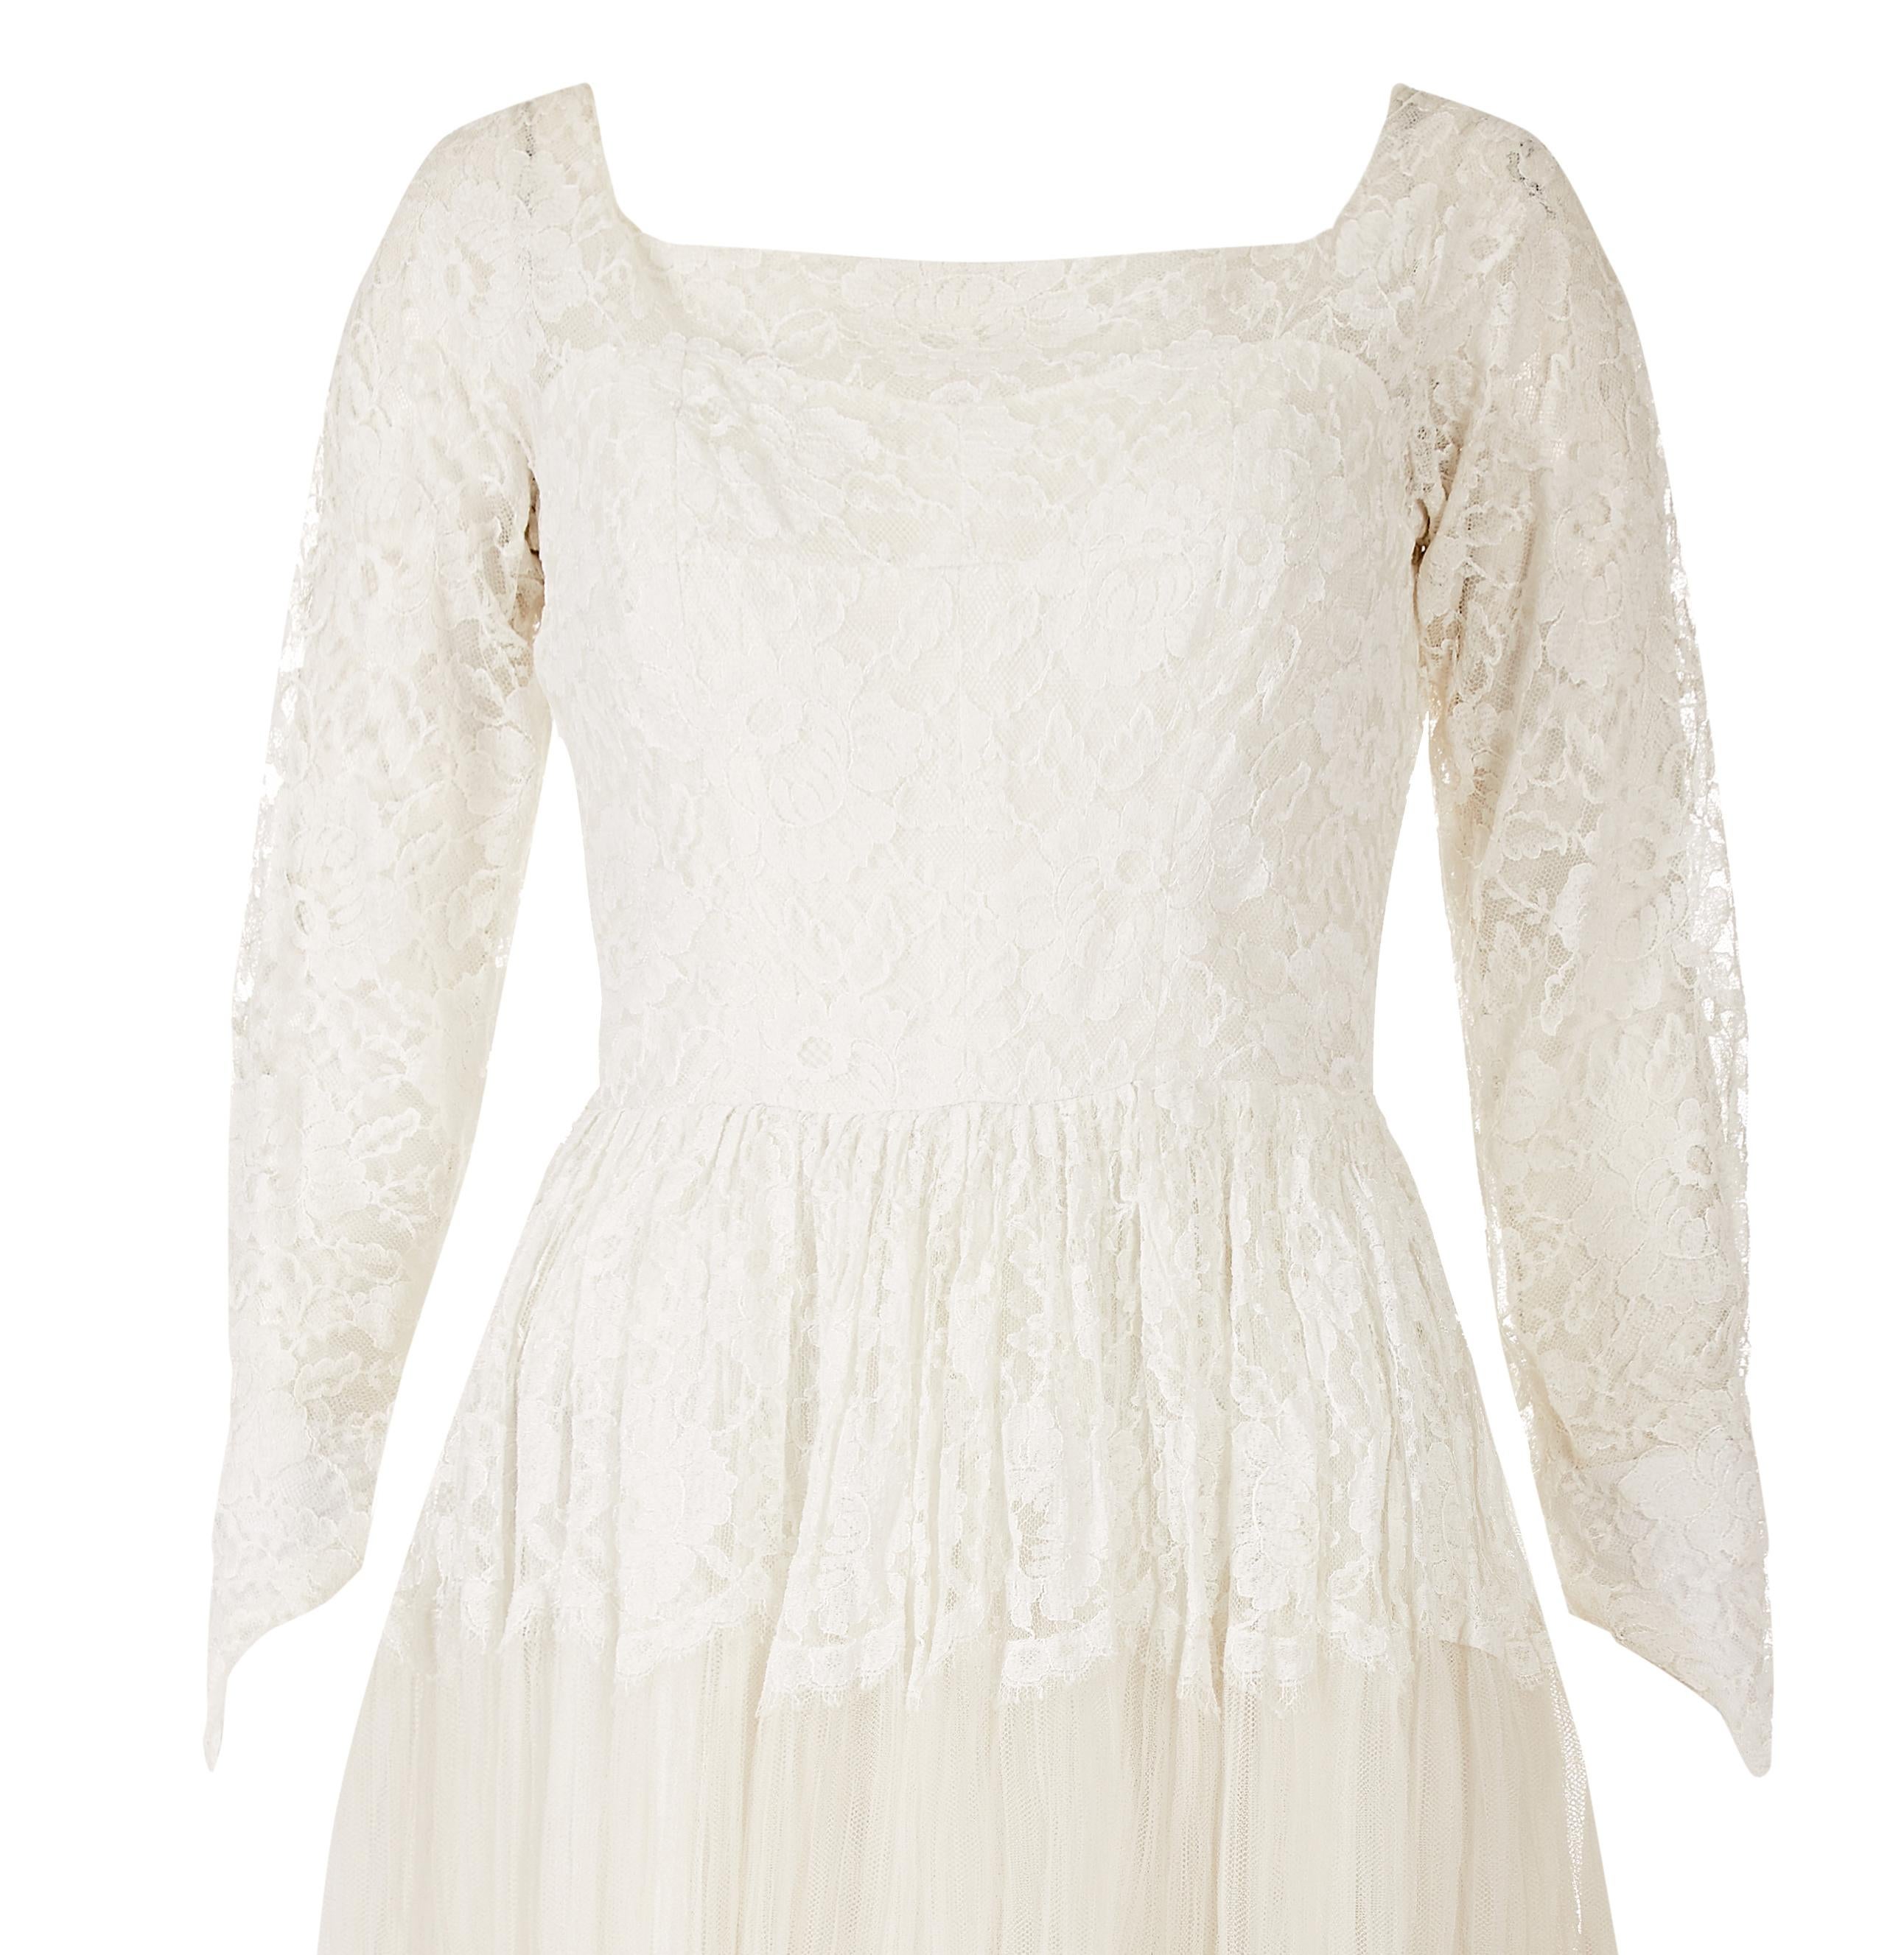 1960s White Chantilly Style Lace Tiered Wedding Dress  In Excellent Condition For Sale In London, GB